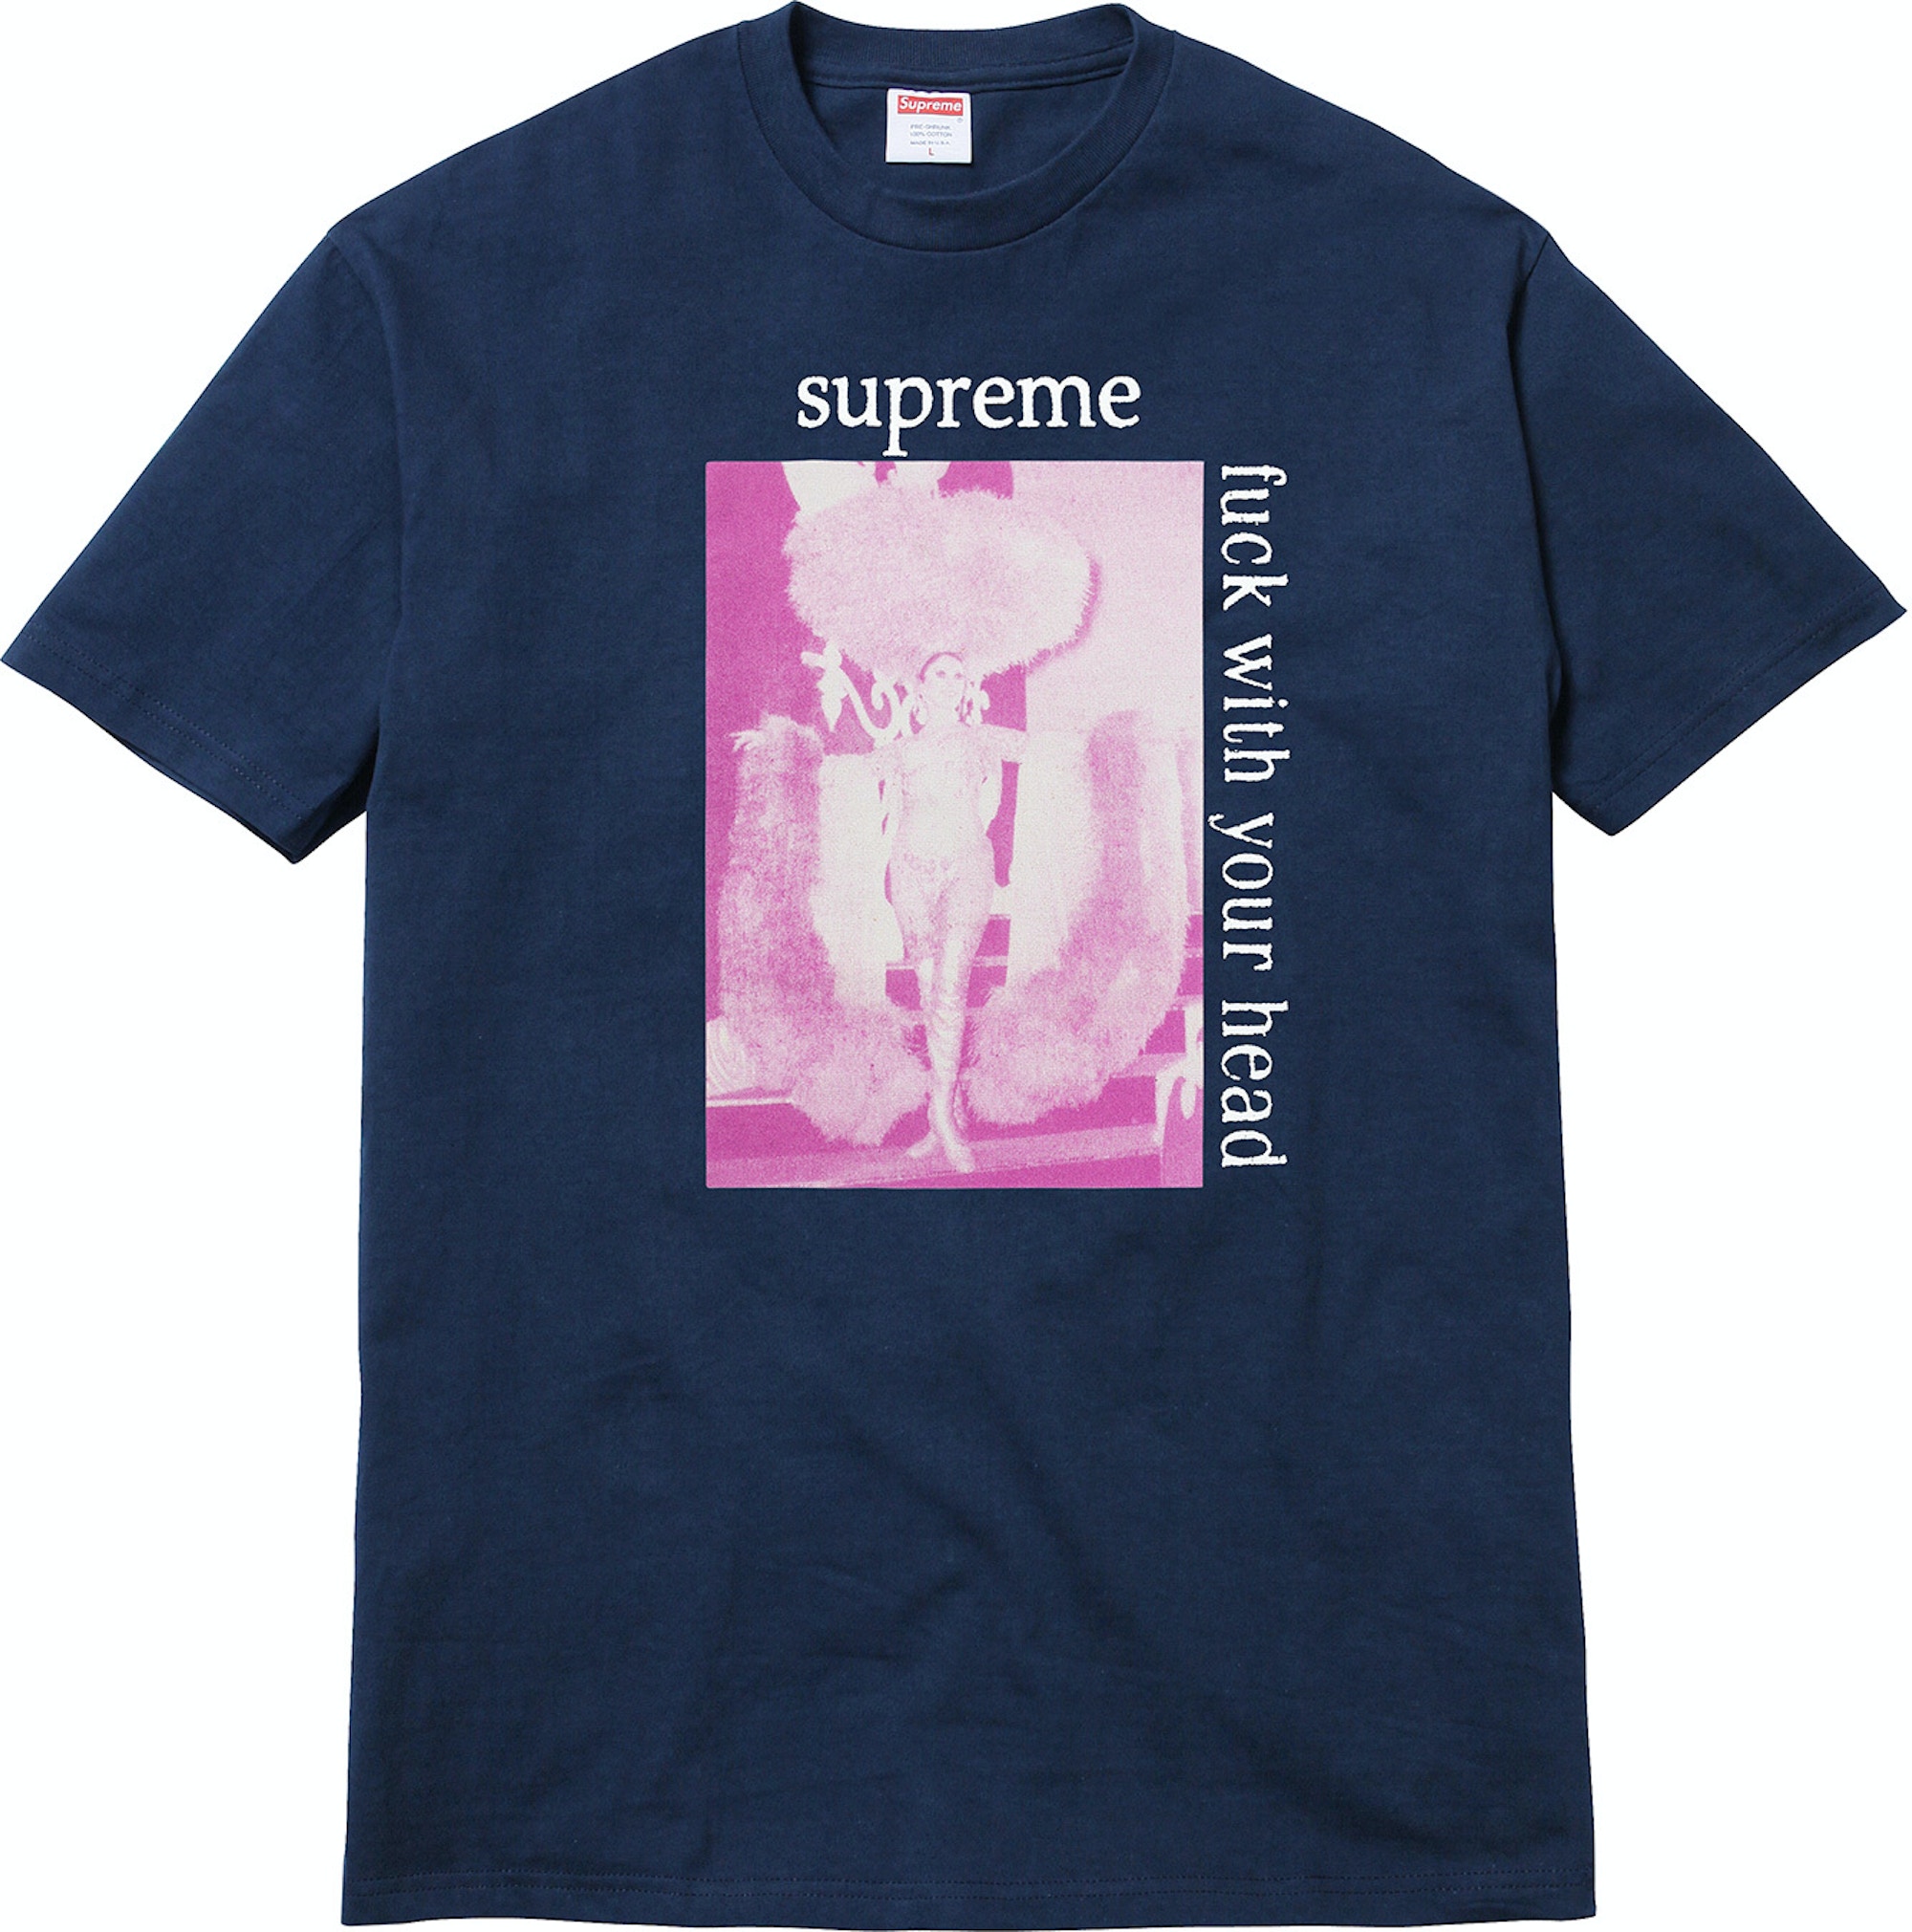 Supreme Fuck With Your Head Tee Navy - FW17